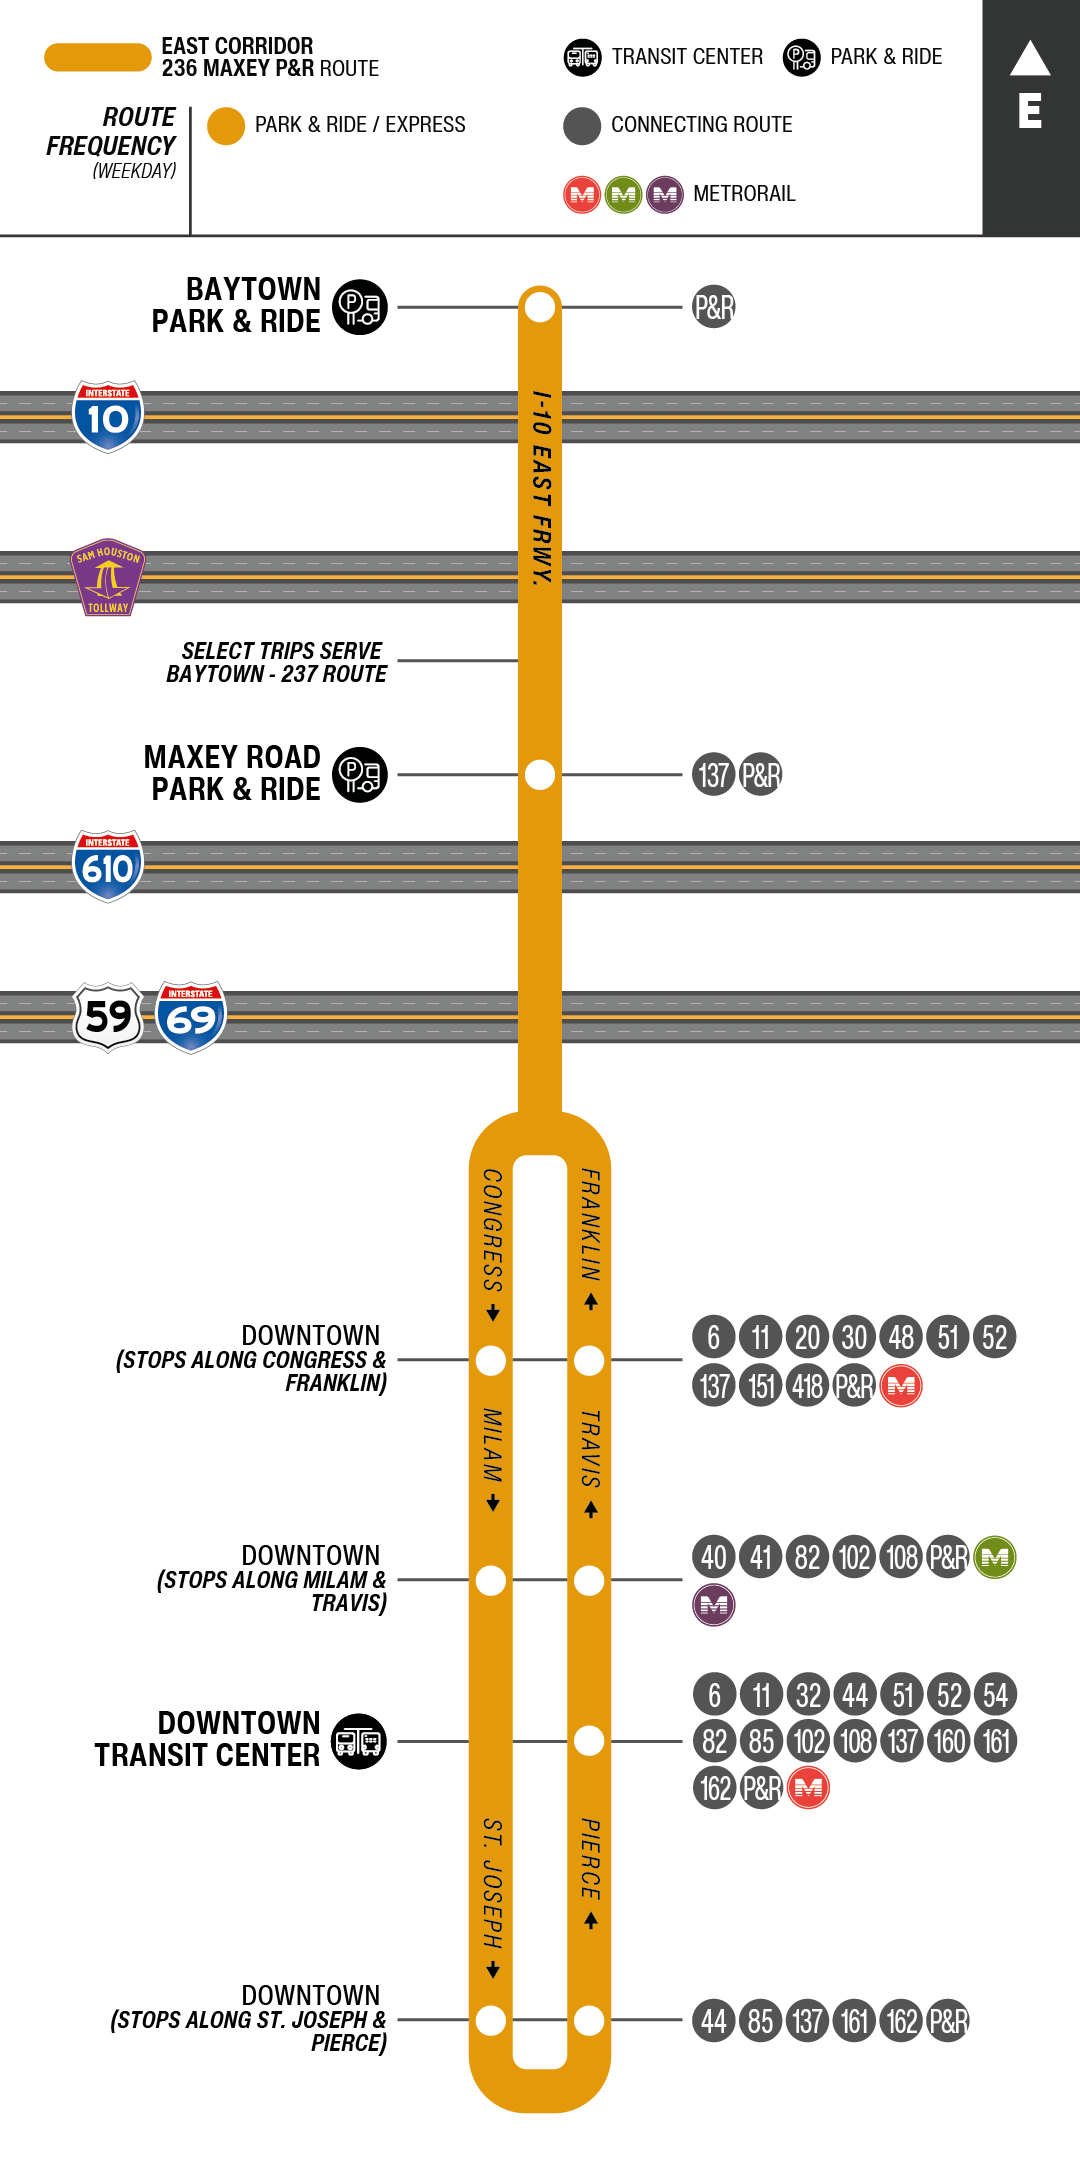 Route map for 236 Maxey Park & Ride bus